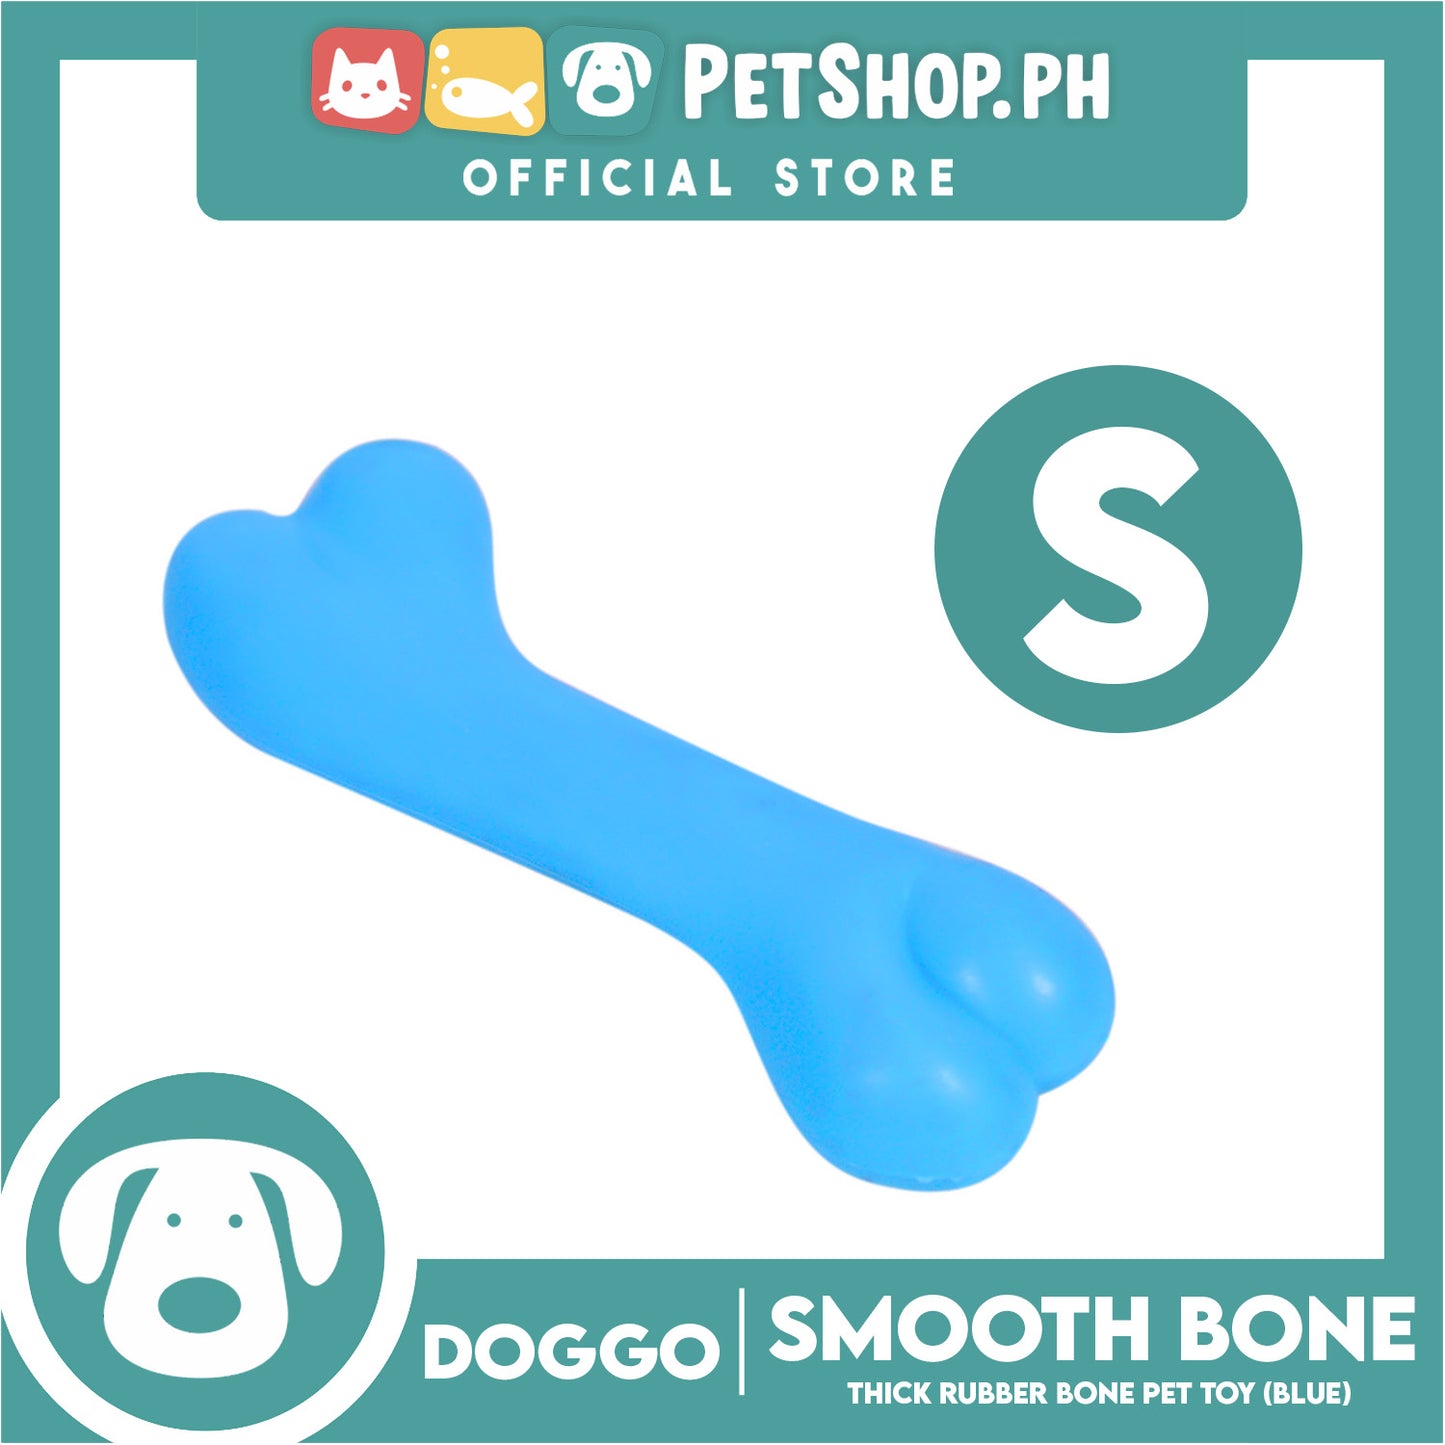 Doggo Smooth Bone (Blue) Small Size Thick Rubber Material Dog Toy